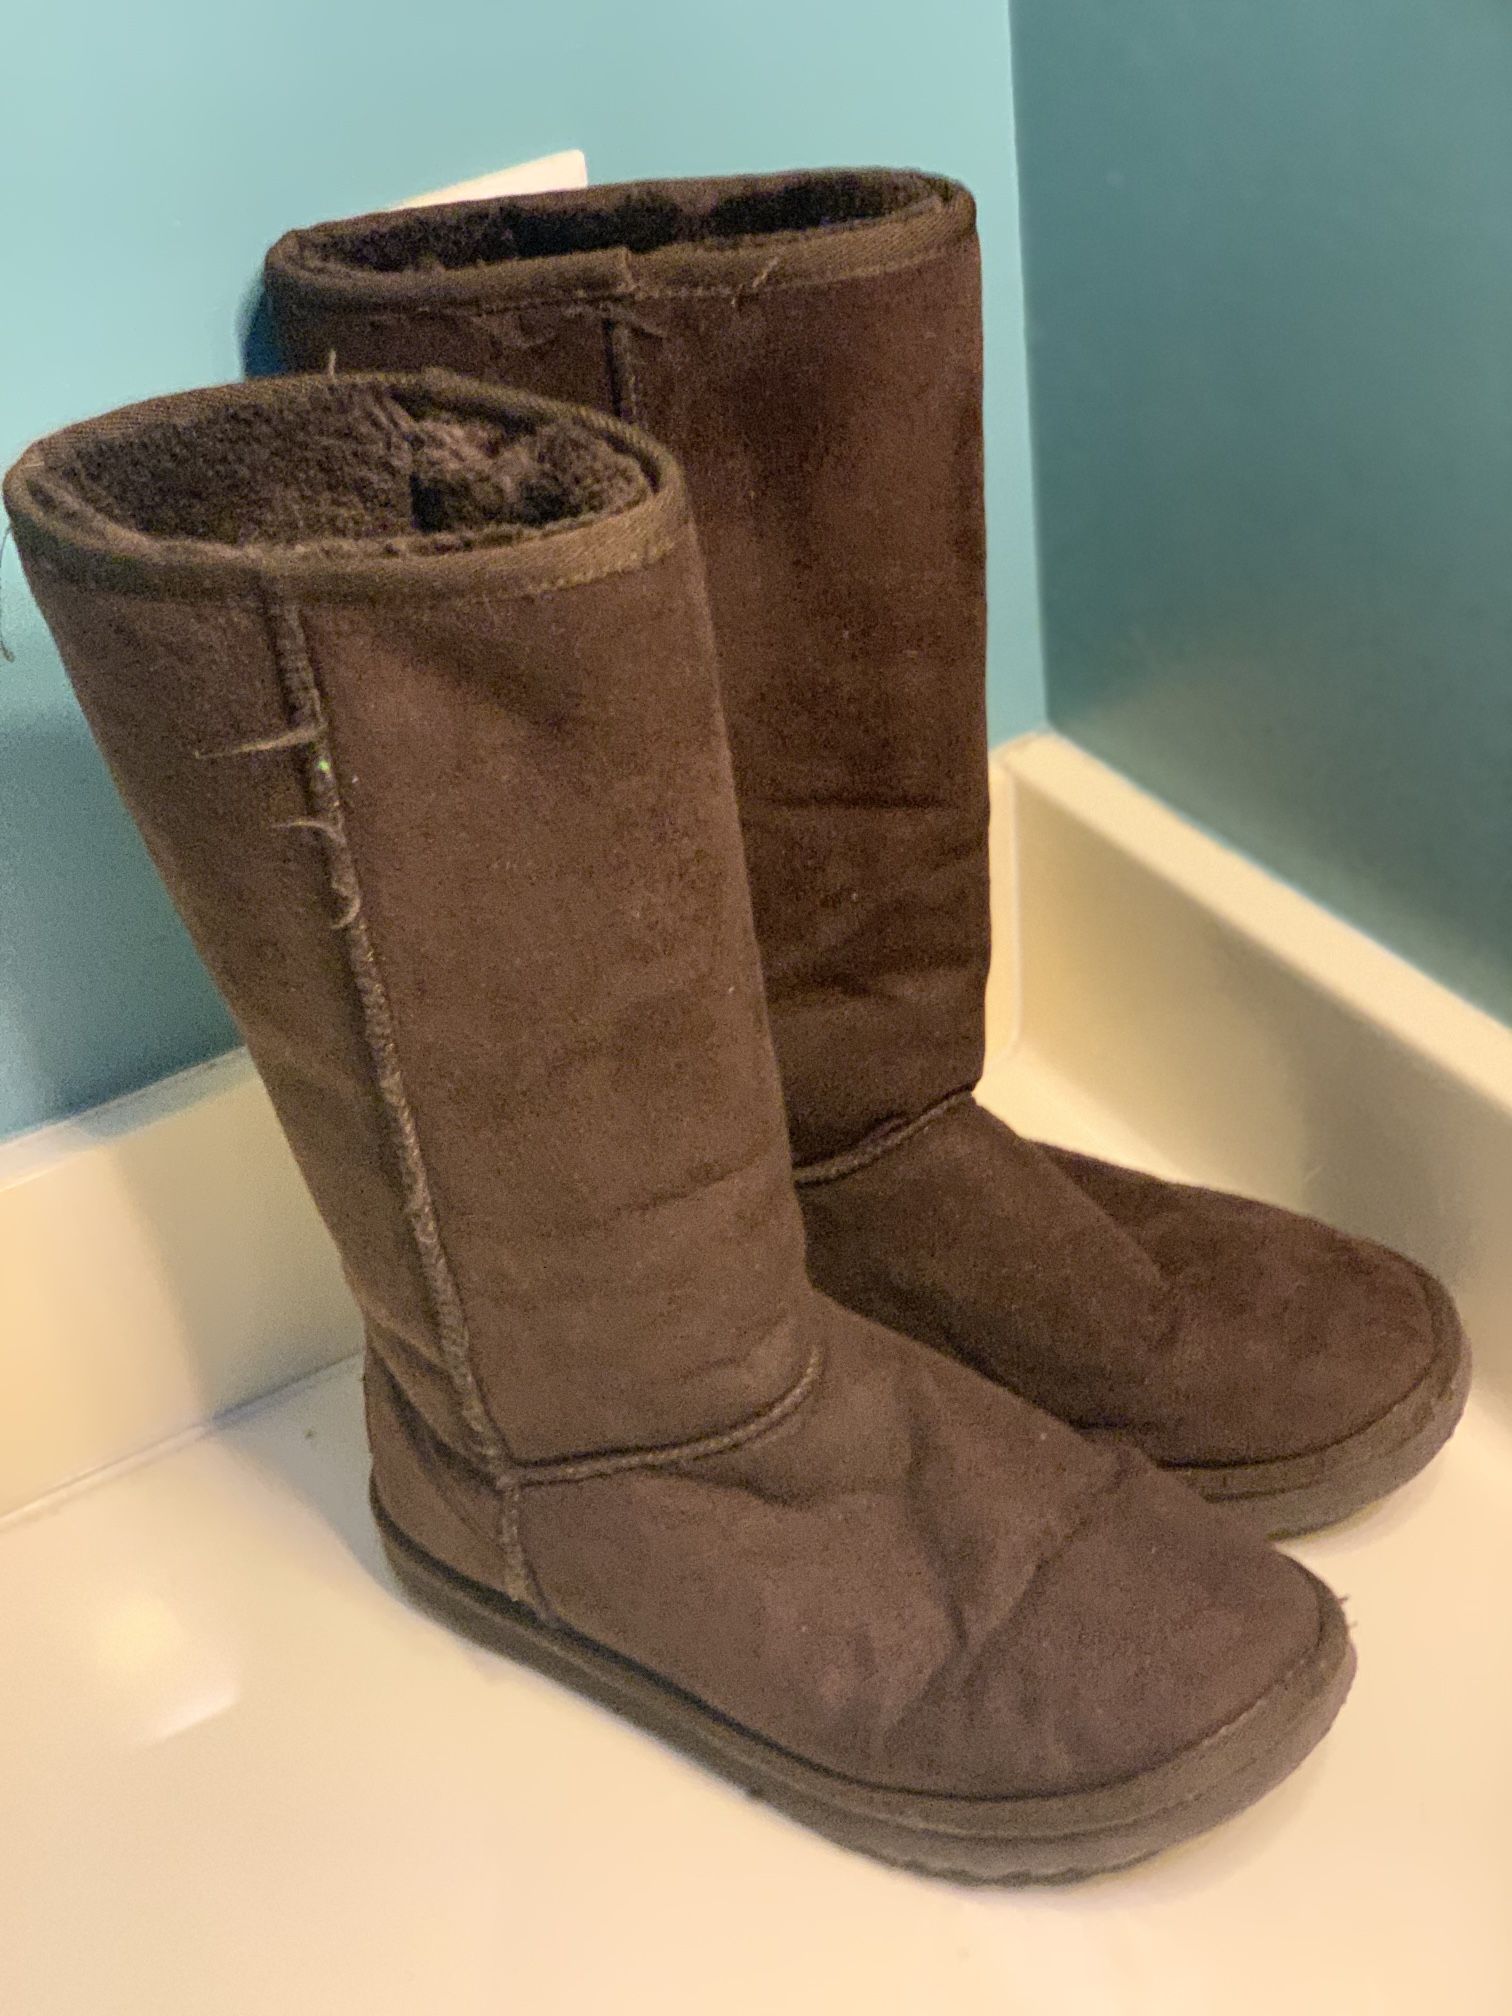 7 W Uggs Boots